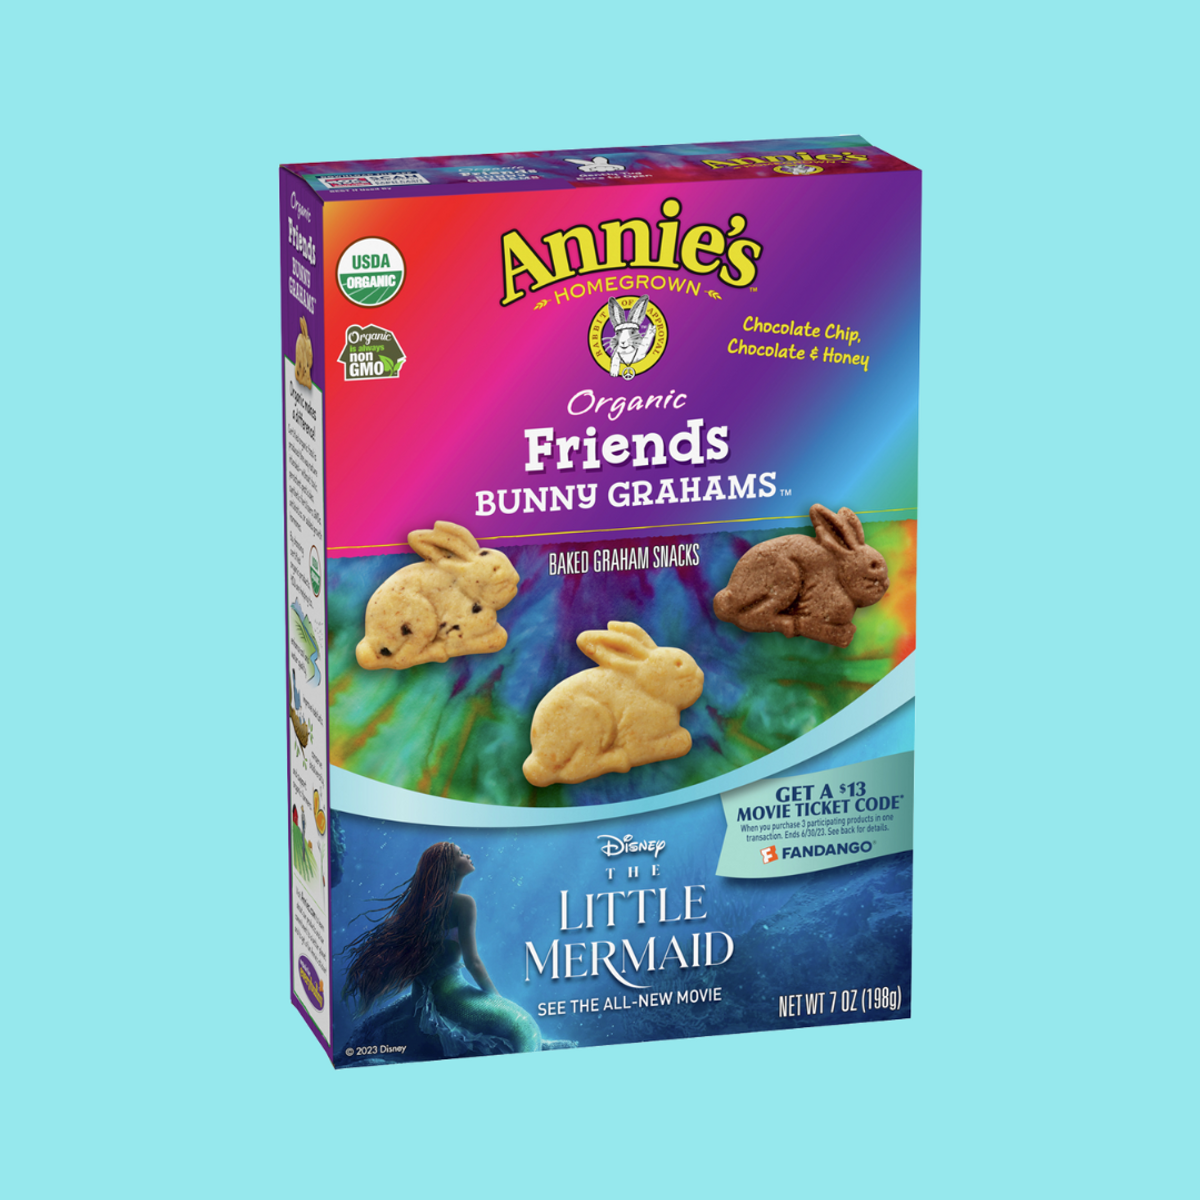 annie's snacks for the little mermaid 2023 film